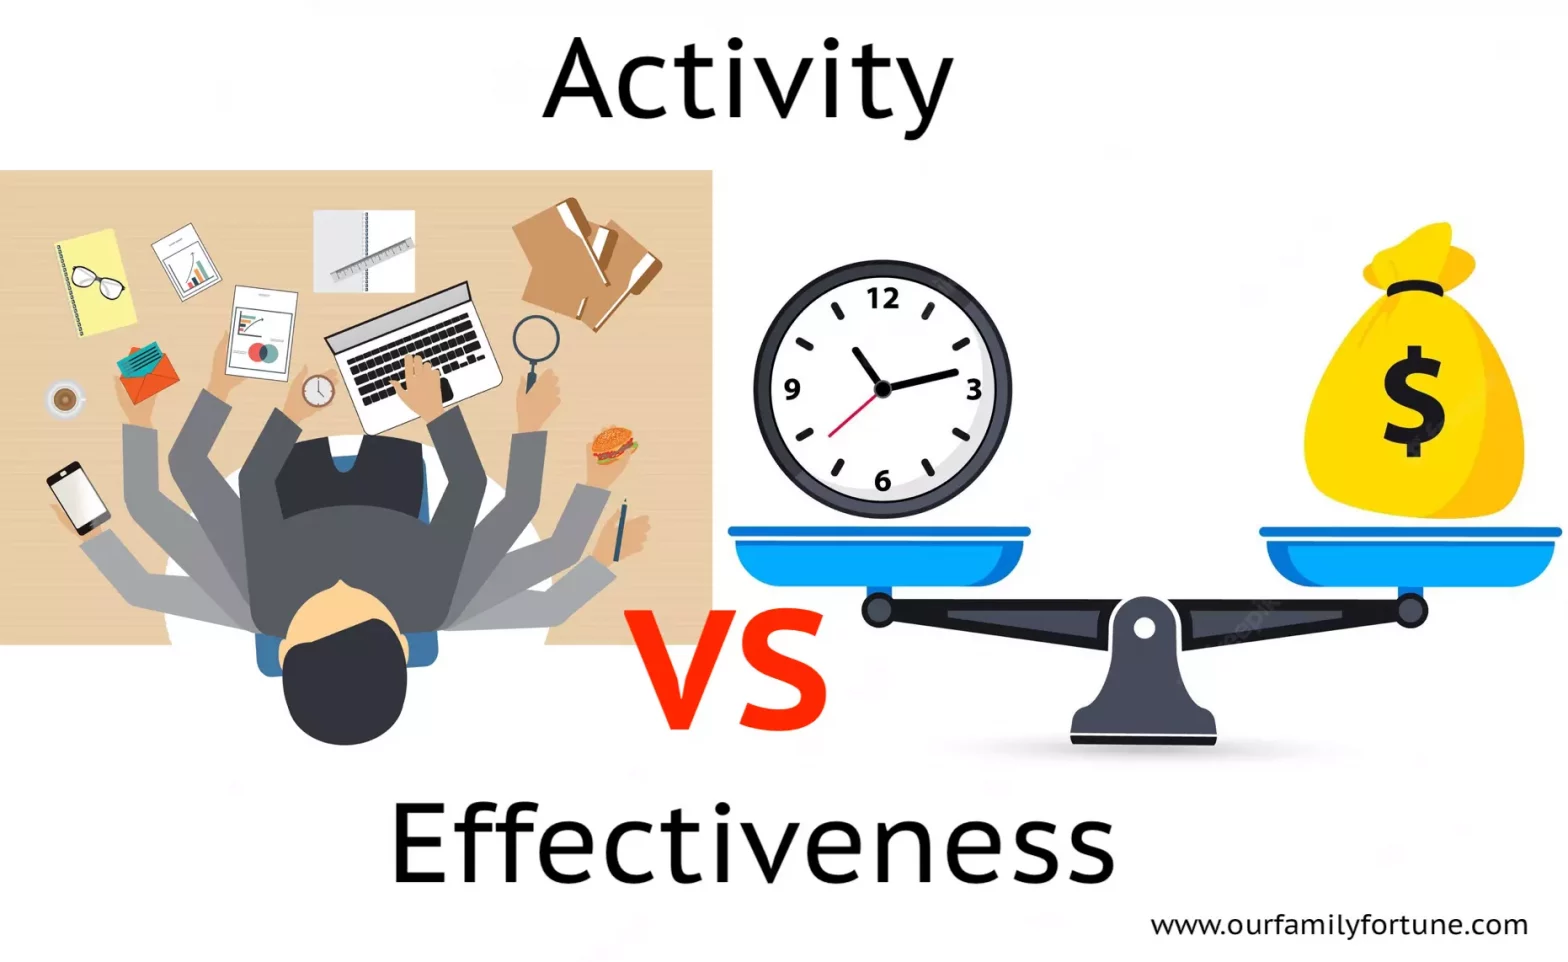 Don’t Confuse Activity for Effectiveness